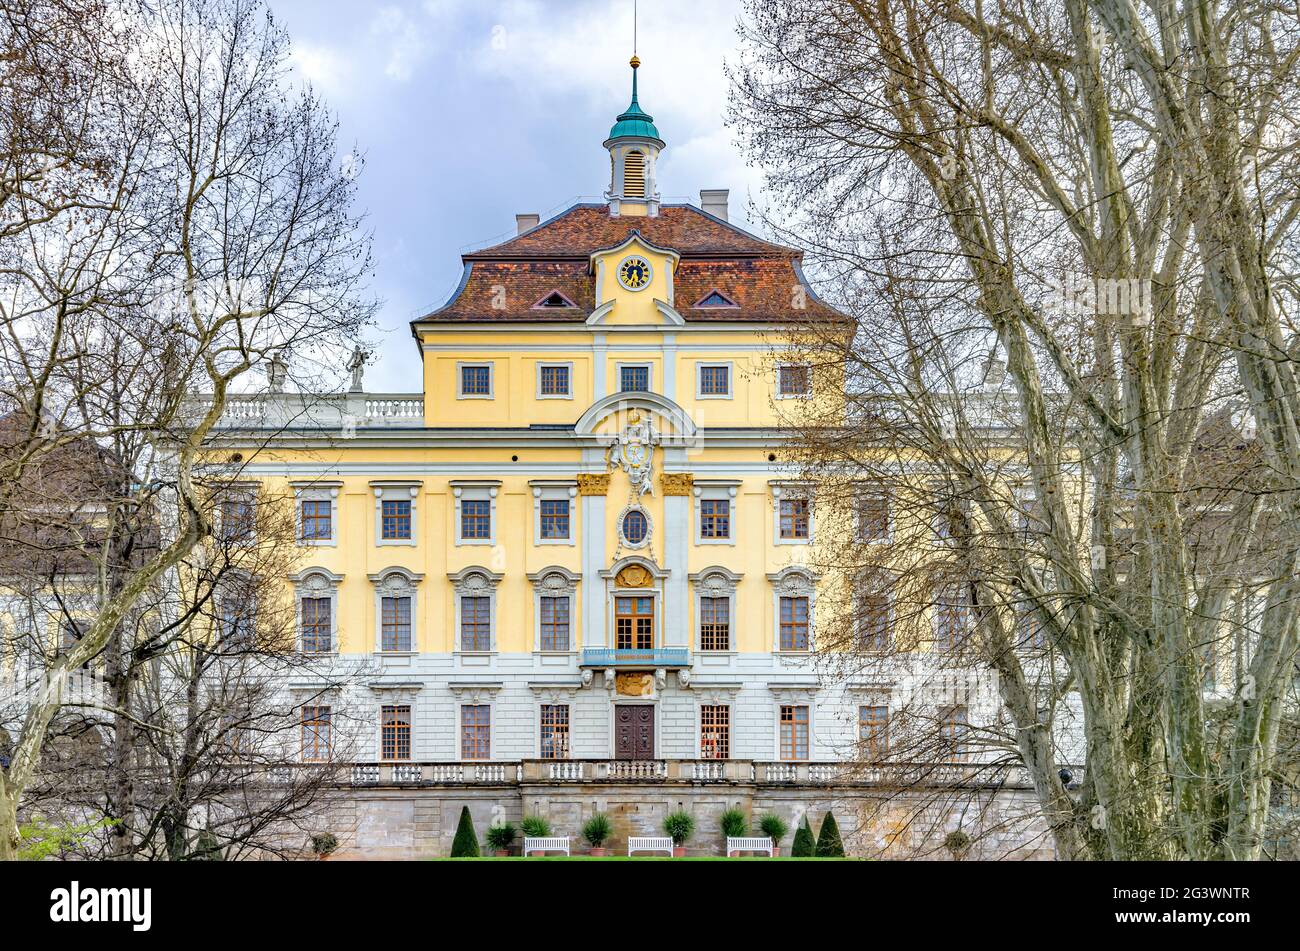 Exterior north facade of Baroque residential palace of Ludwigsburg, located near Stuttgart, Baden-Württemberg, Germany. Stock Photo